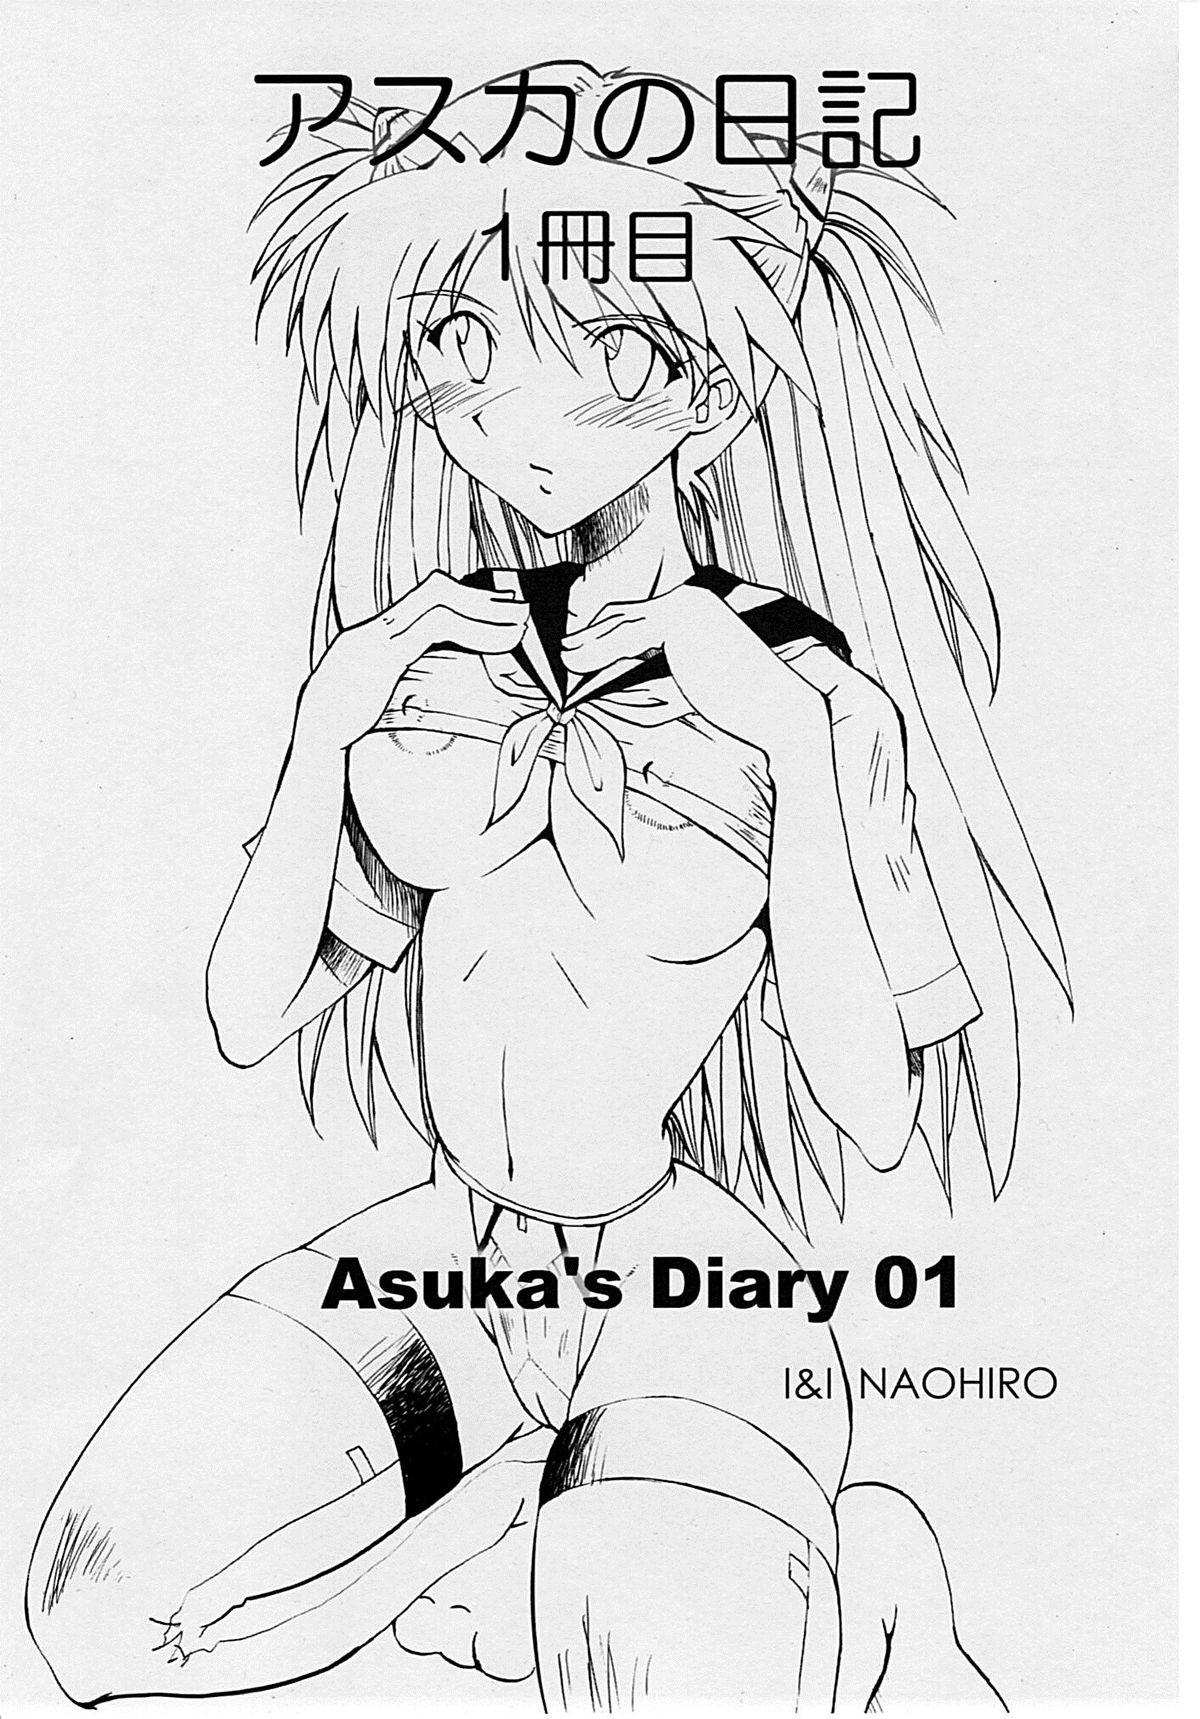 Sex Pussy Asuka's Diary 01 - Neon genesis evangelion Amateur Pussy - Page 2